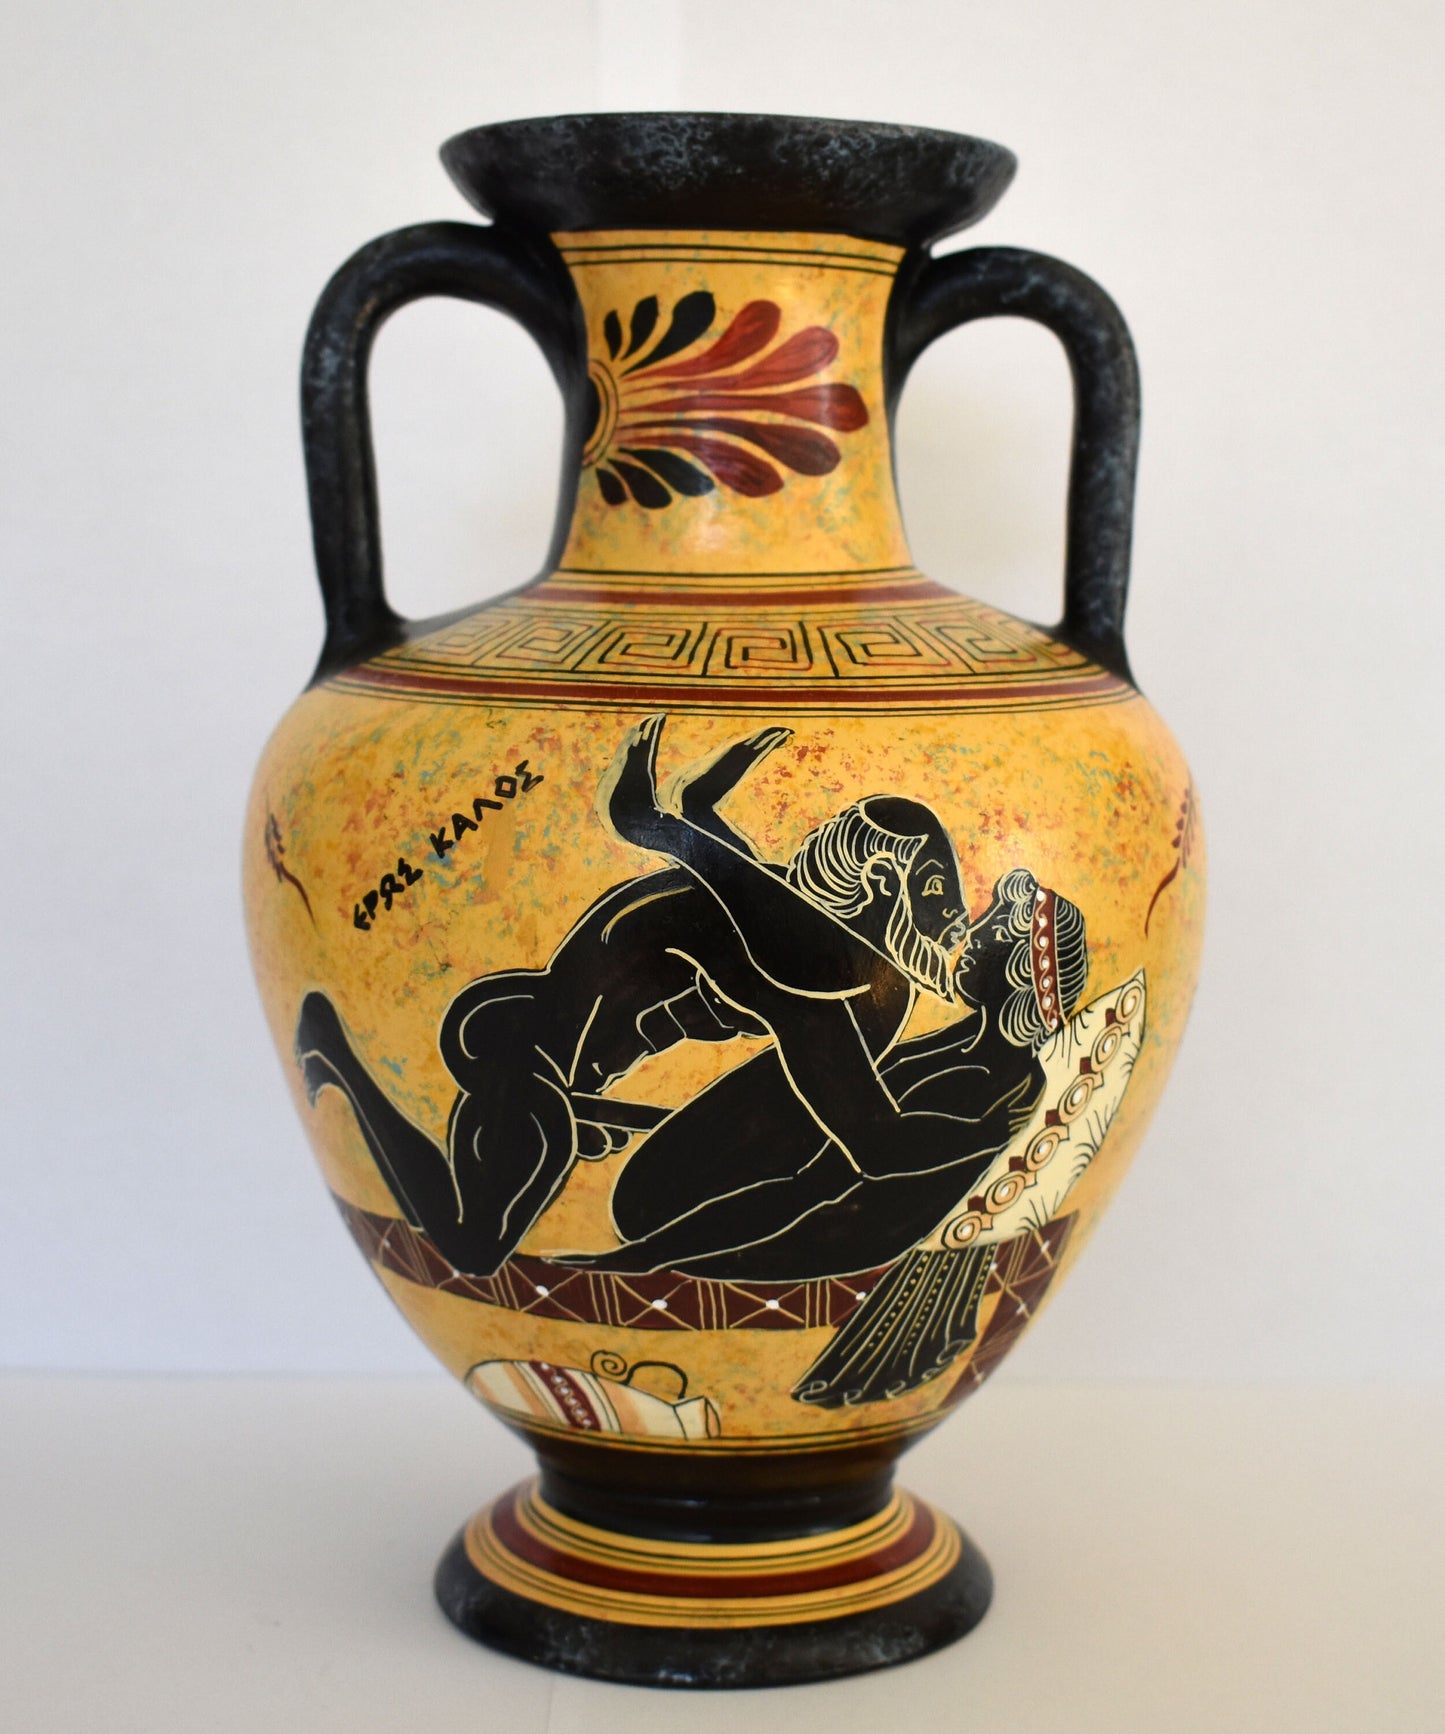 Satyr - Male Nature Spirit - Athenian Couple in Love - Sex is Never Enough - Ceramic Vase